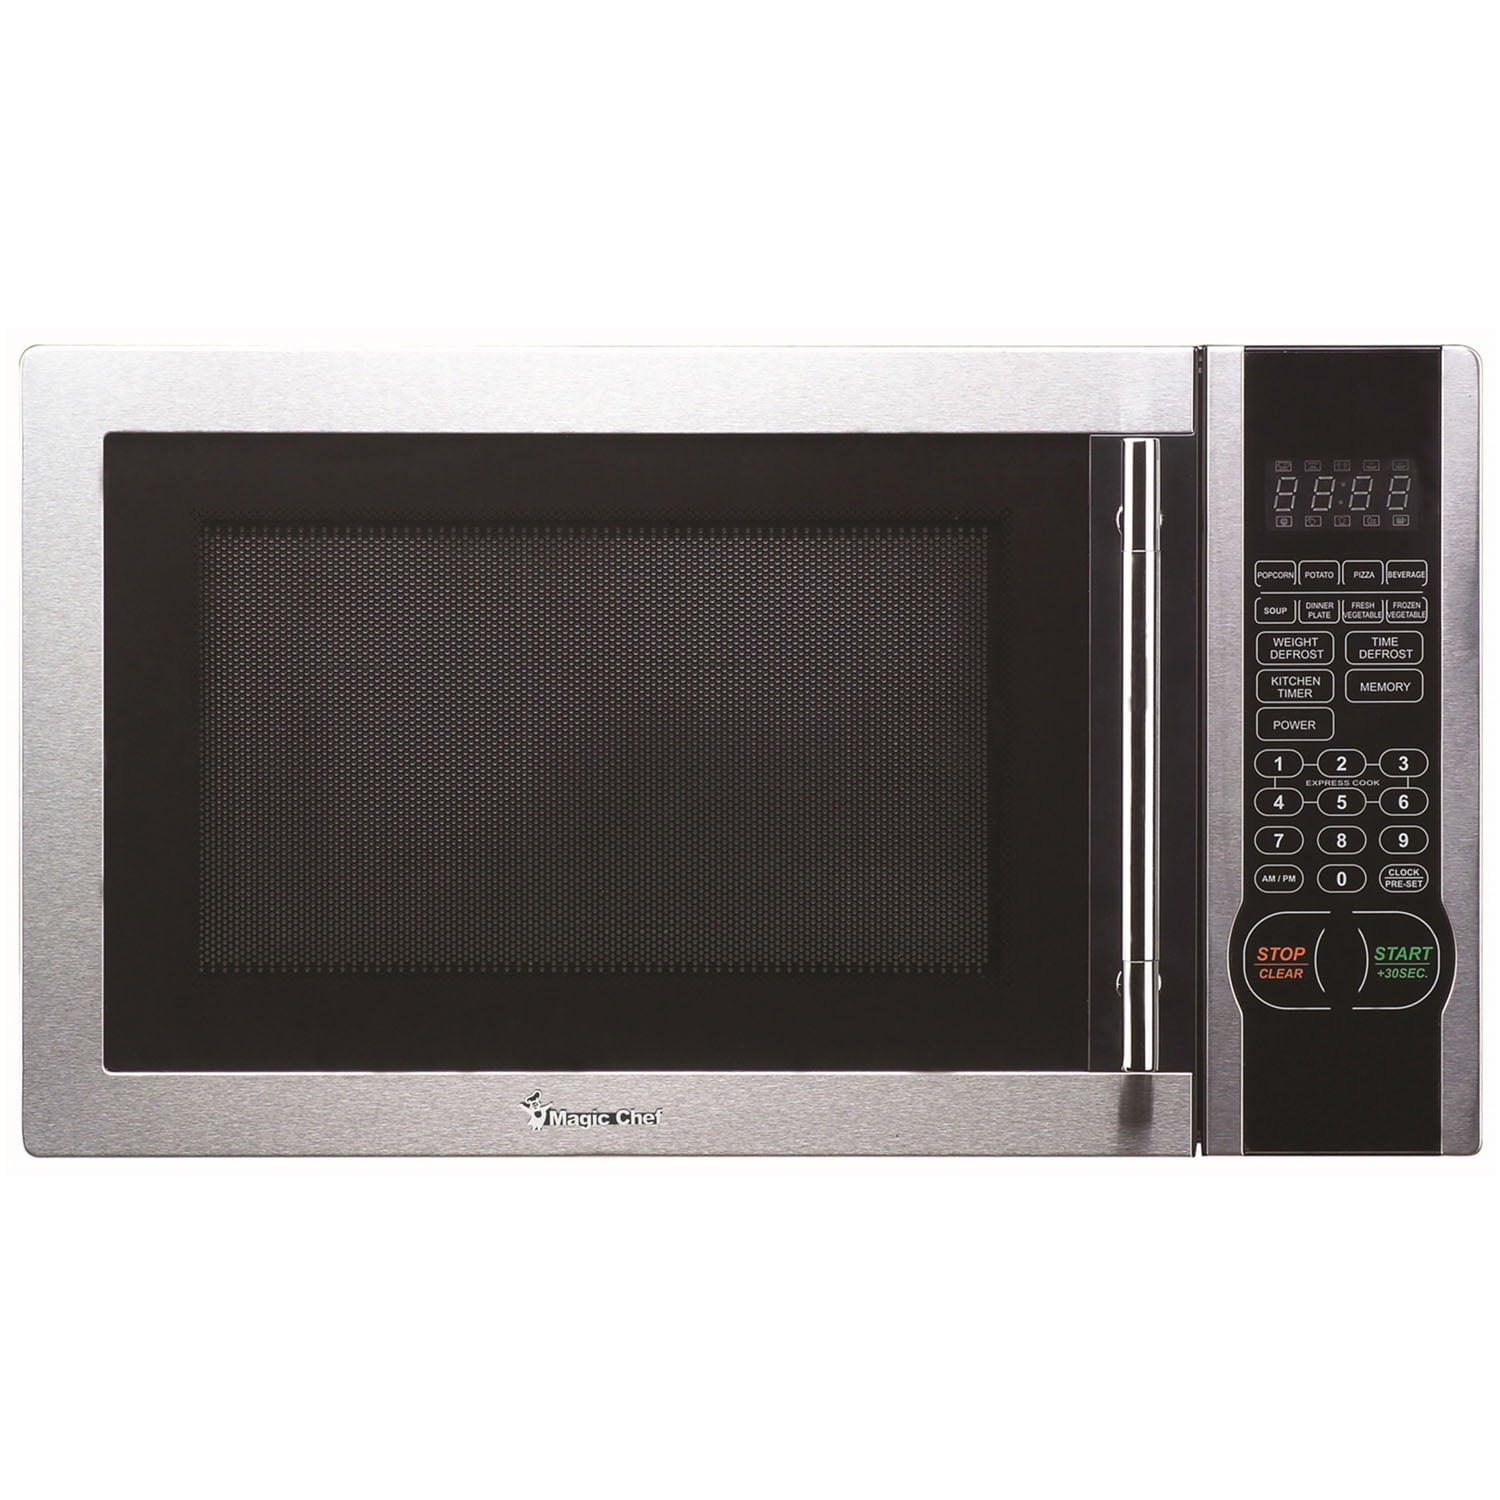 Magic Chef 1.1-Cu. Ft. 1000W Countertop Microwave Oven with Stylish